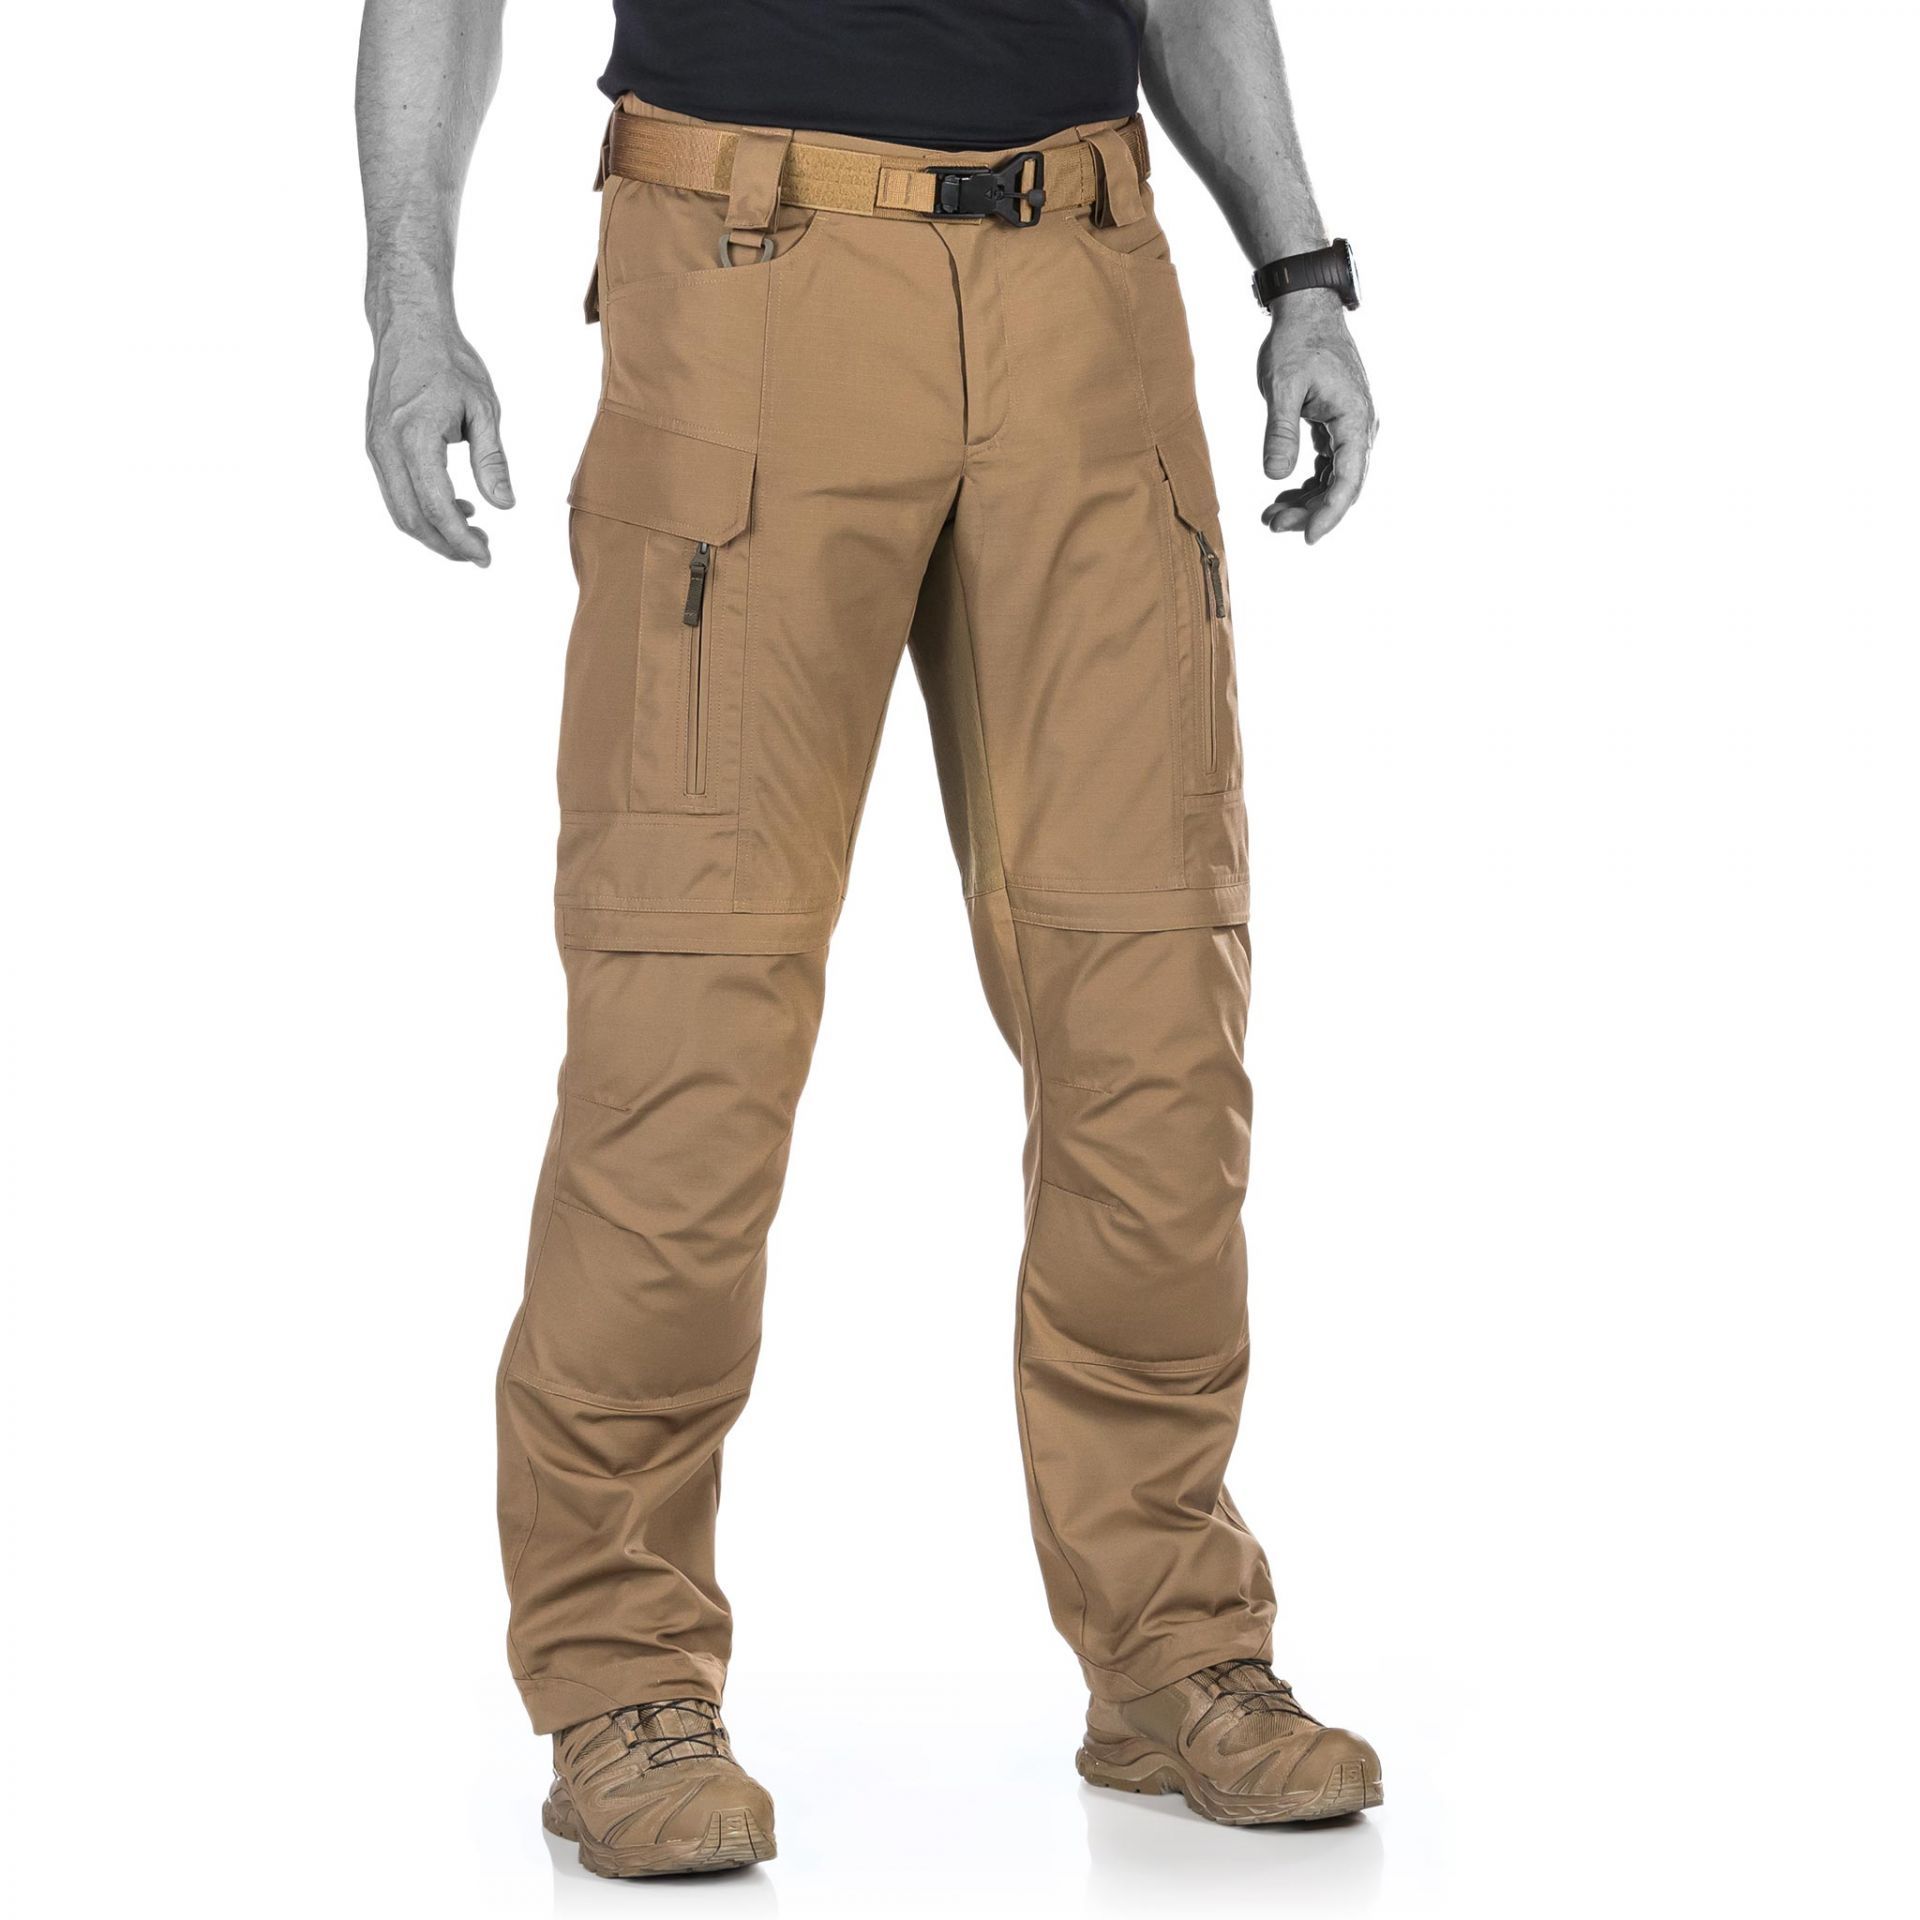 Tactical Pants Men's Combat Army Trousers Many Pockets Casual Cargo  Pants | eBay